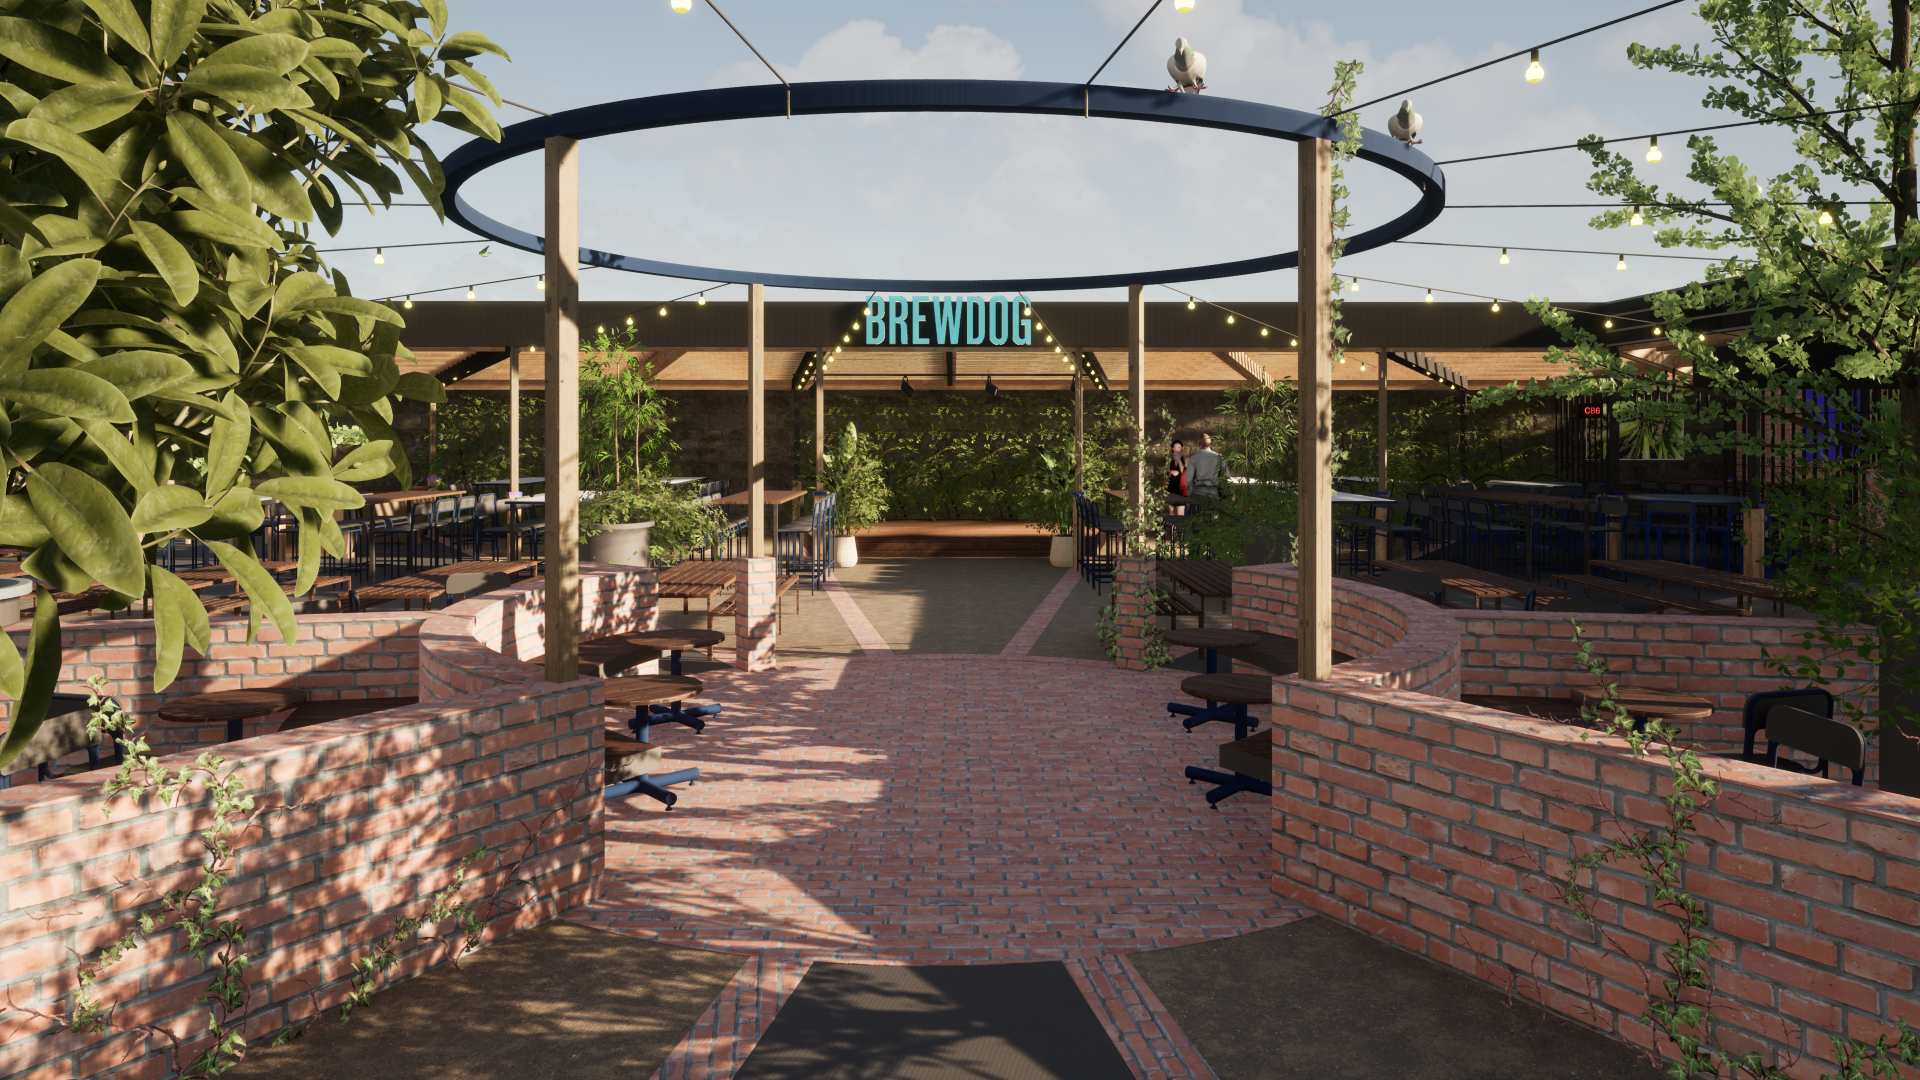 Scottish Brewery BrewDog Is Opening Its Second Aussie Venue at Pentridge This Spring